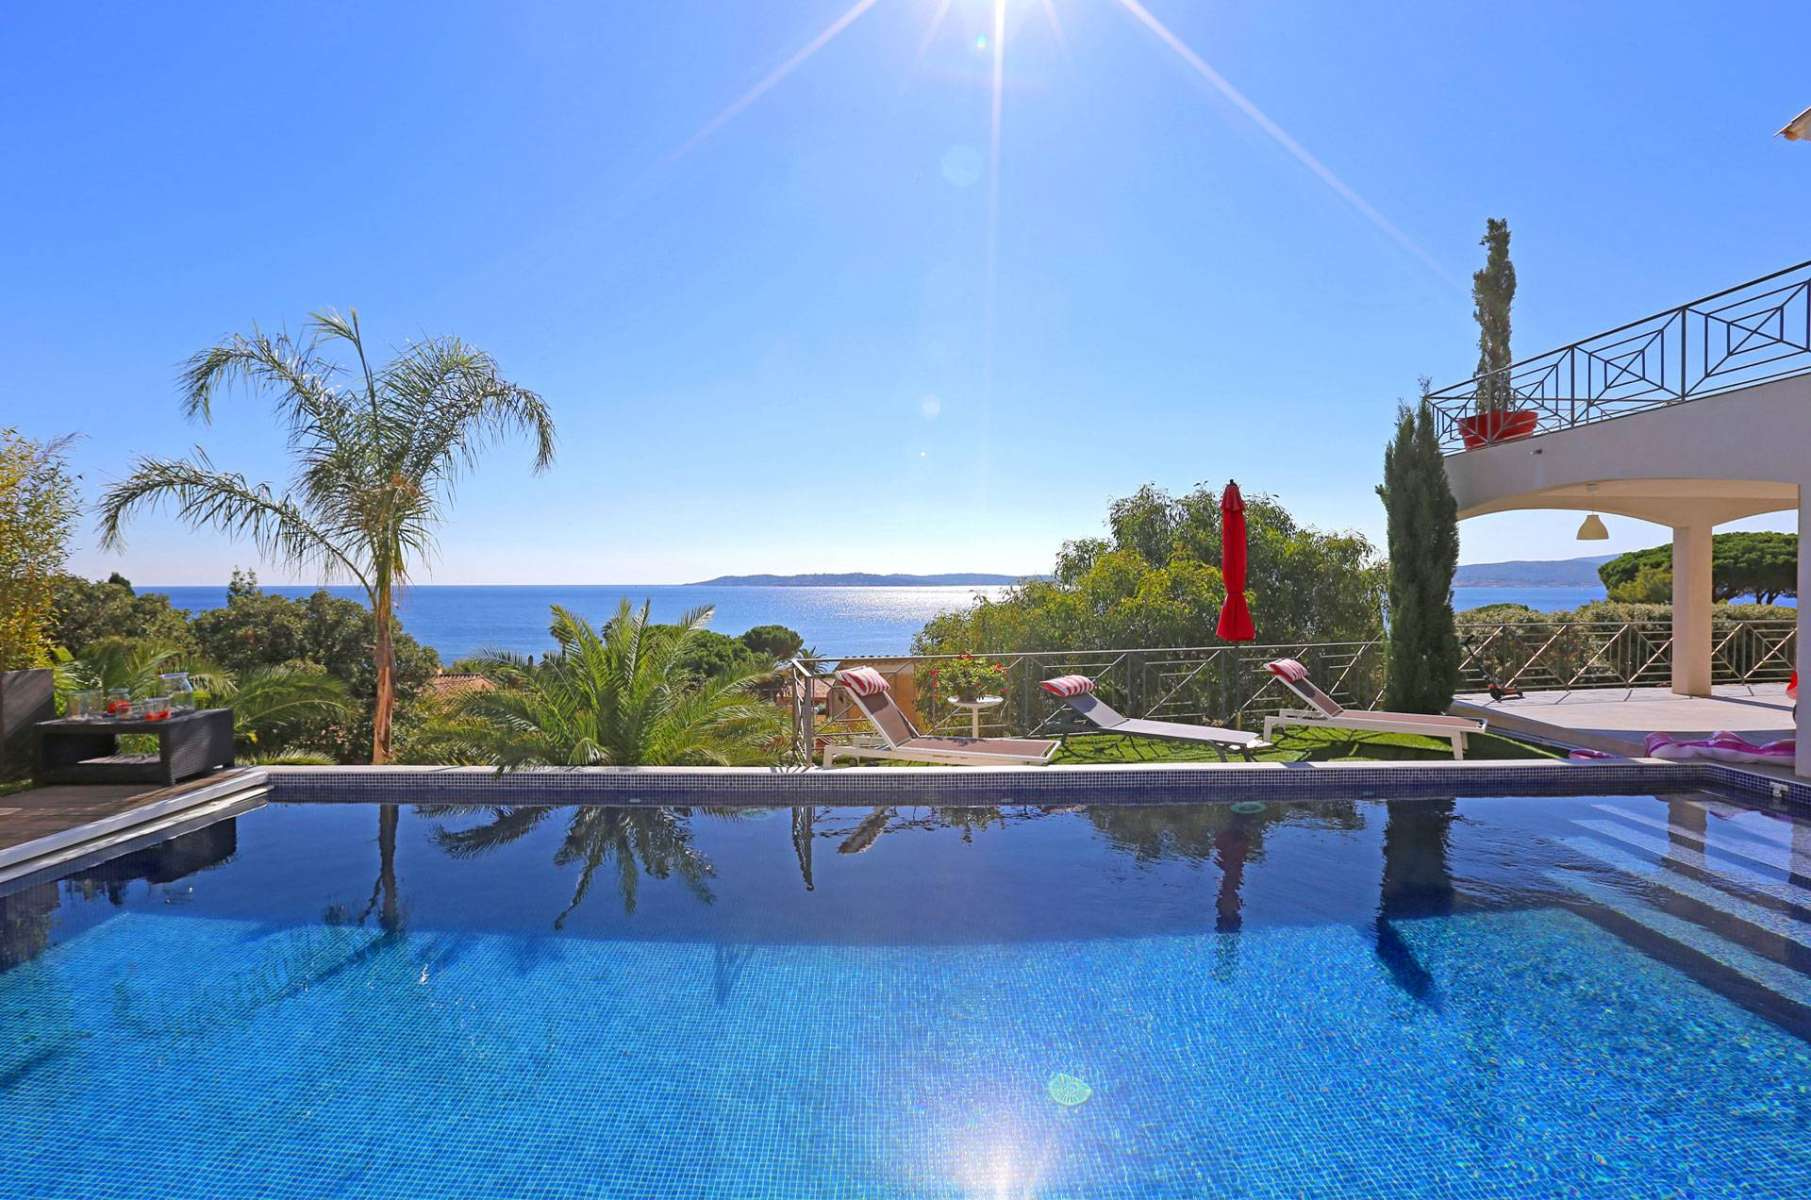 Rent modern house in Saint-Maxime with beautiful sea view